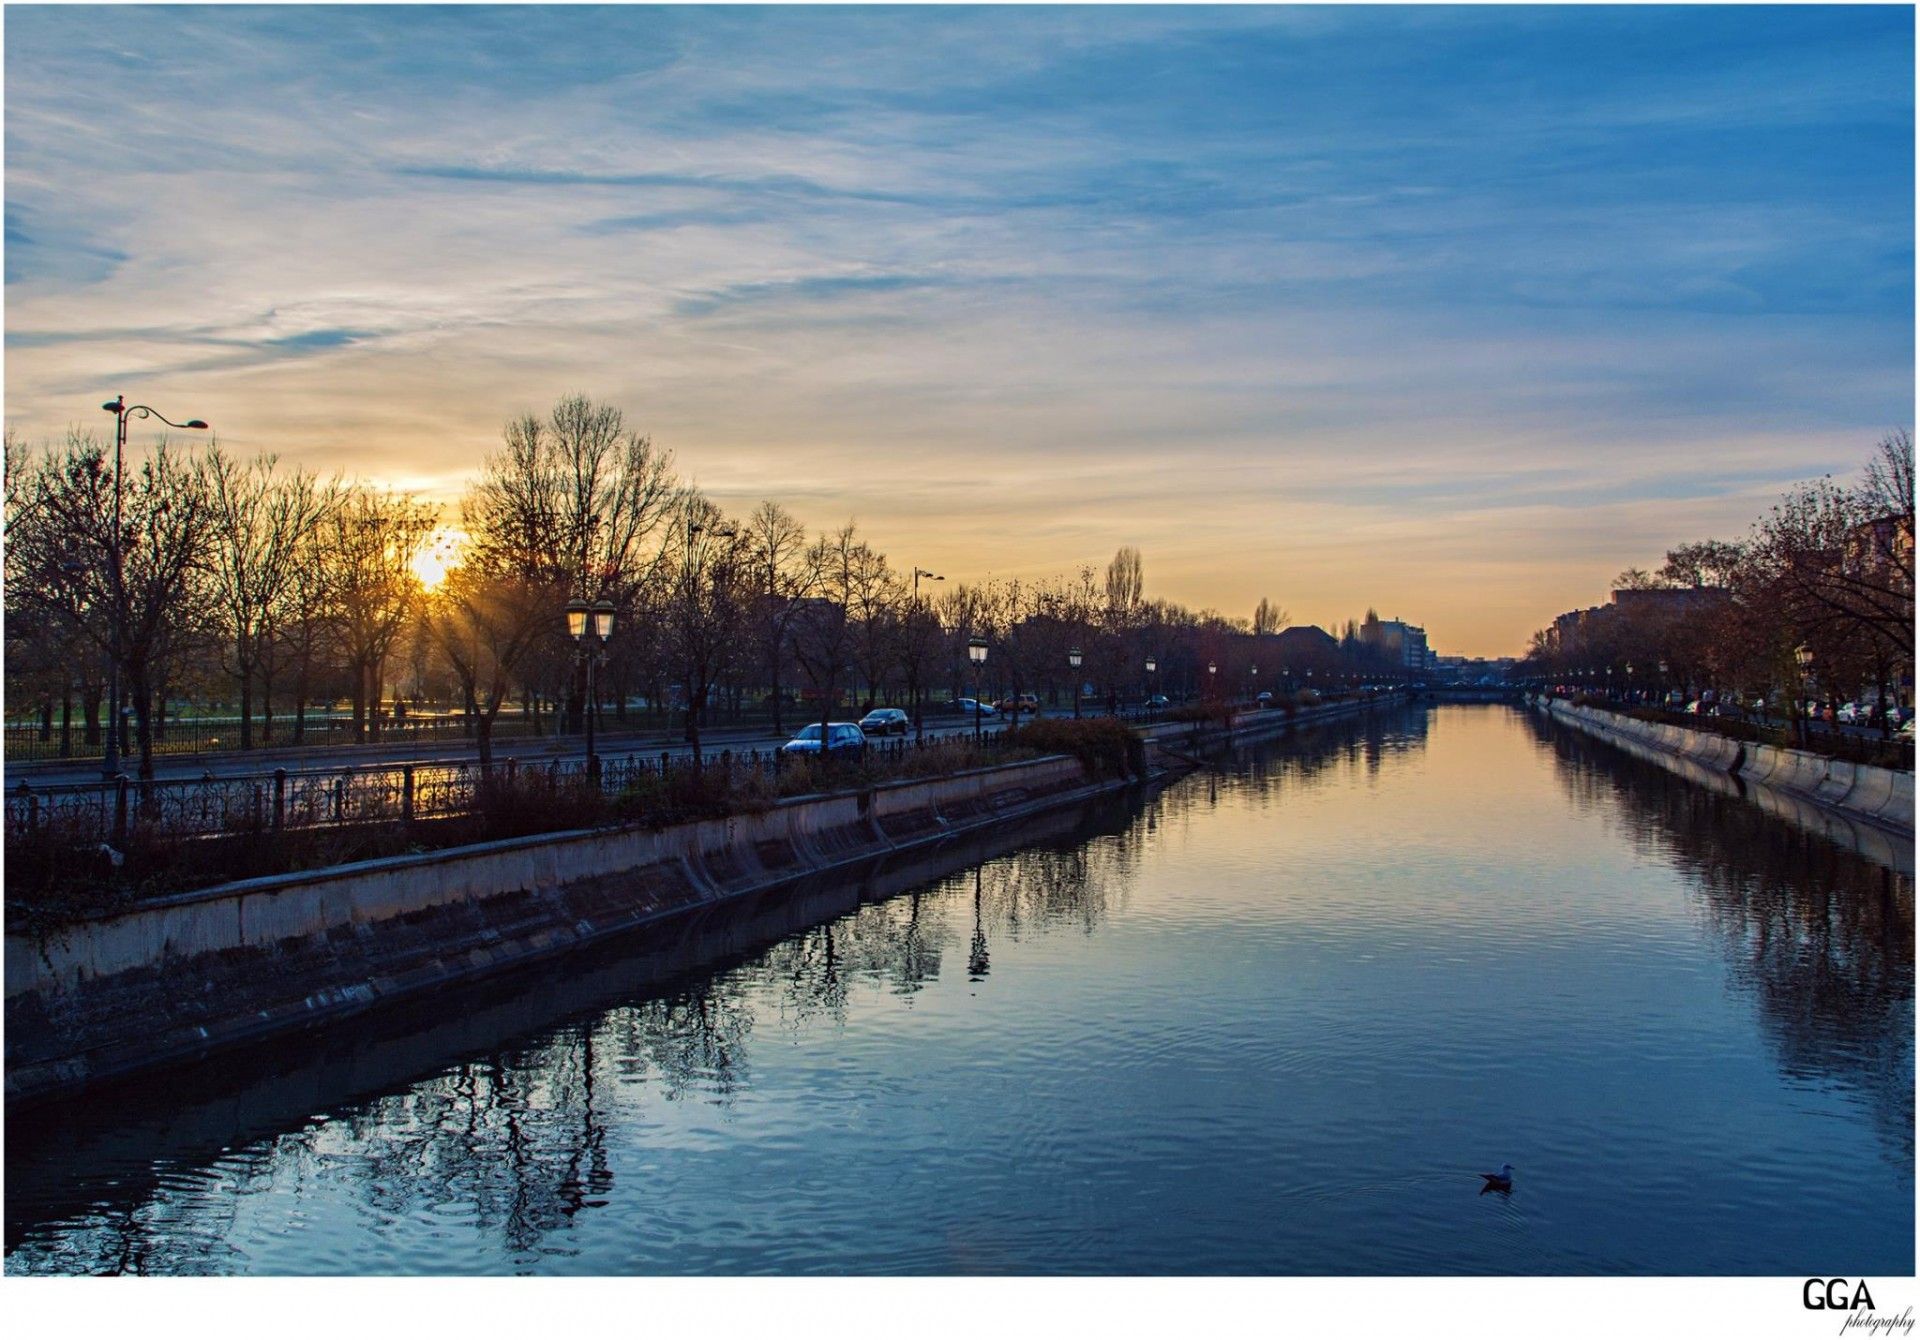 5 Best Places to Watch the Sunset in Bucharest